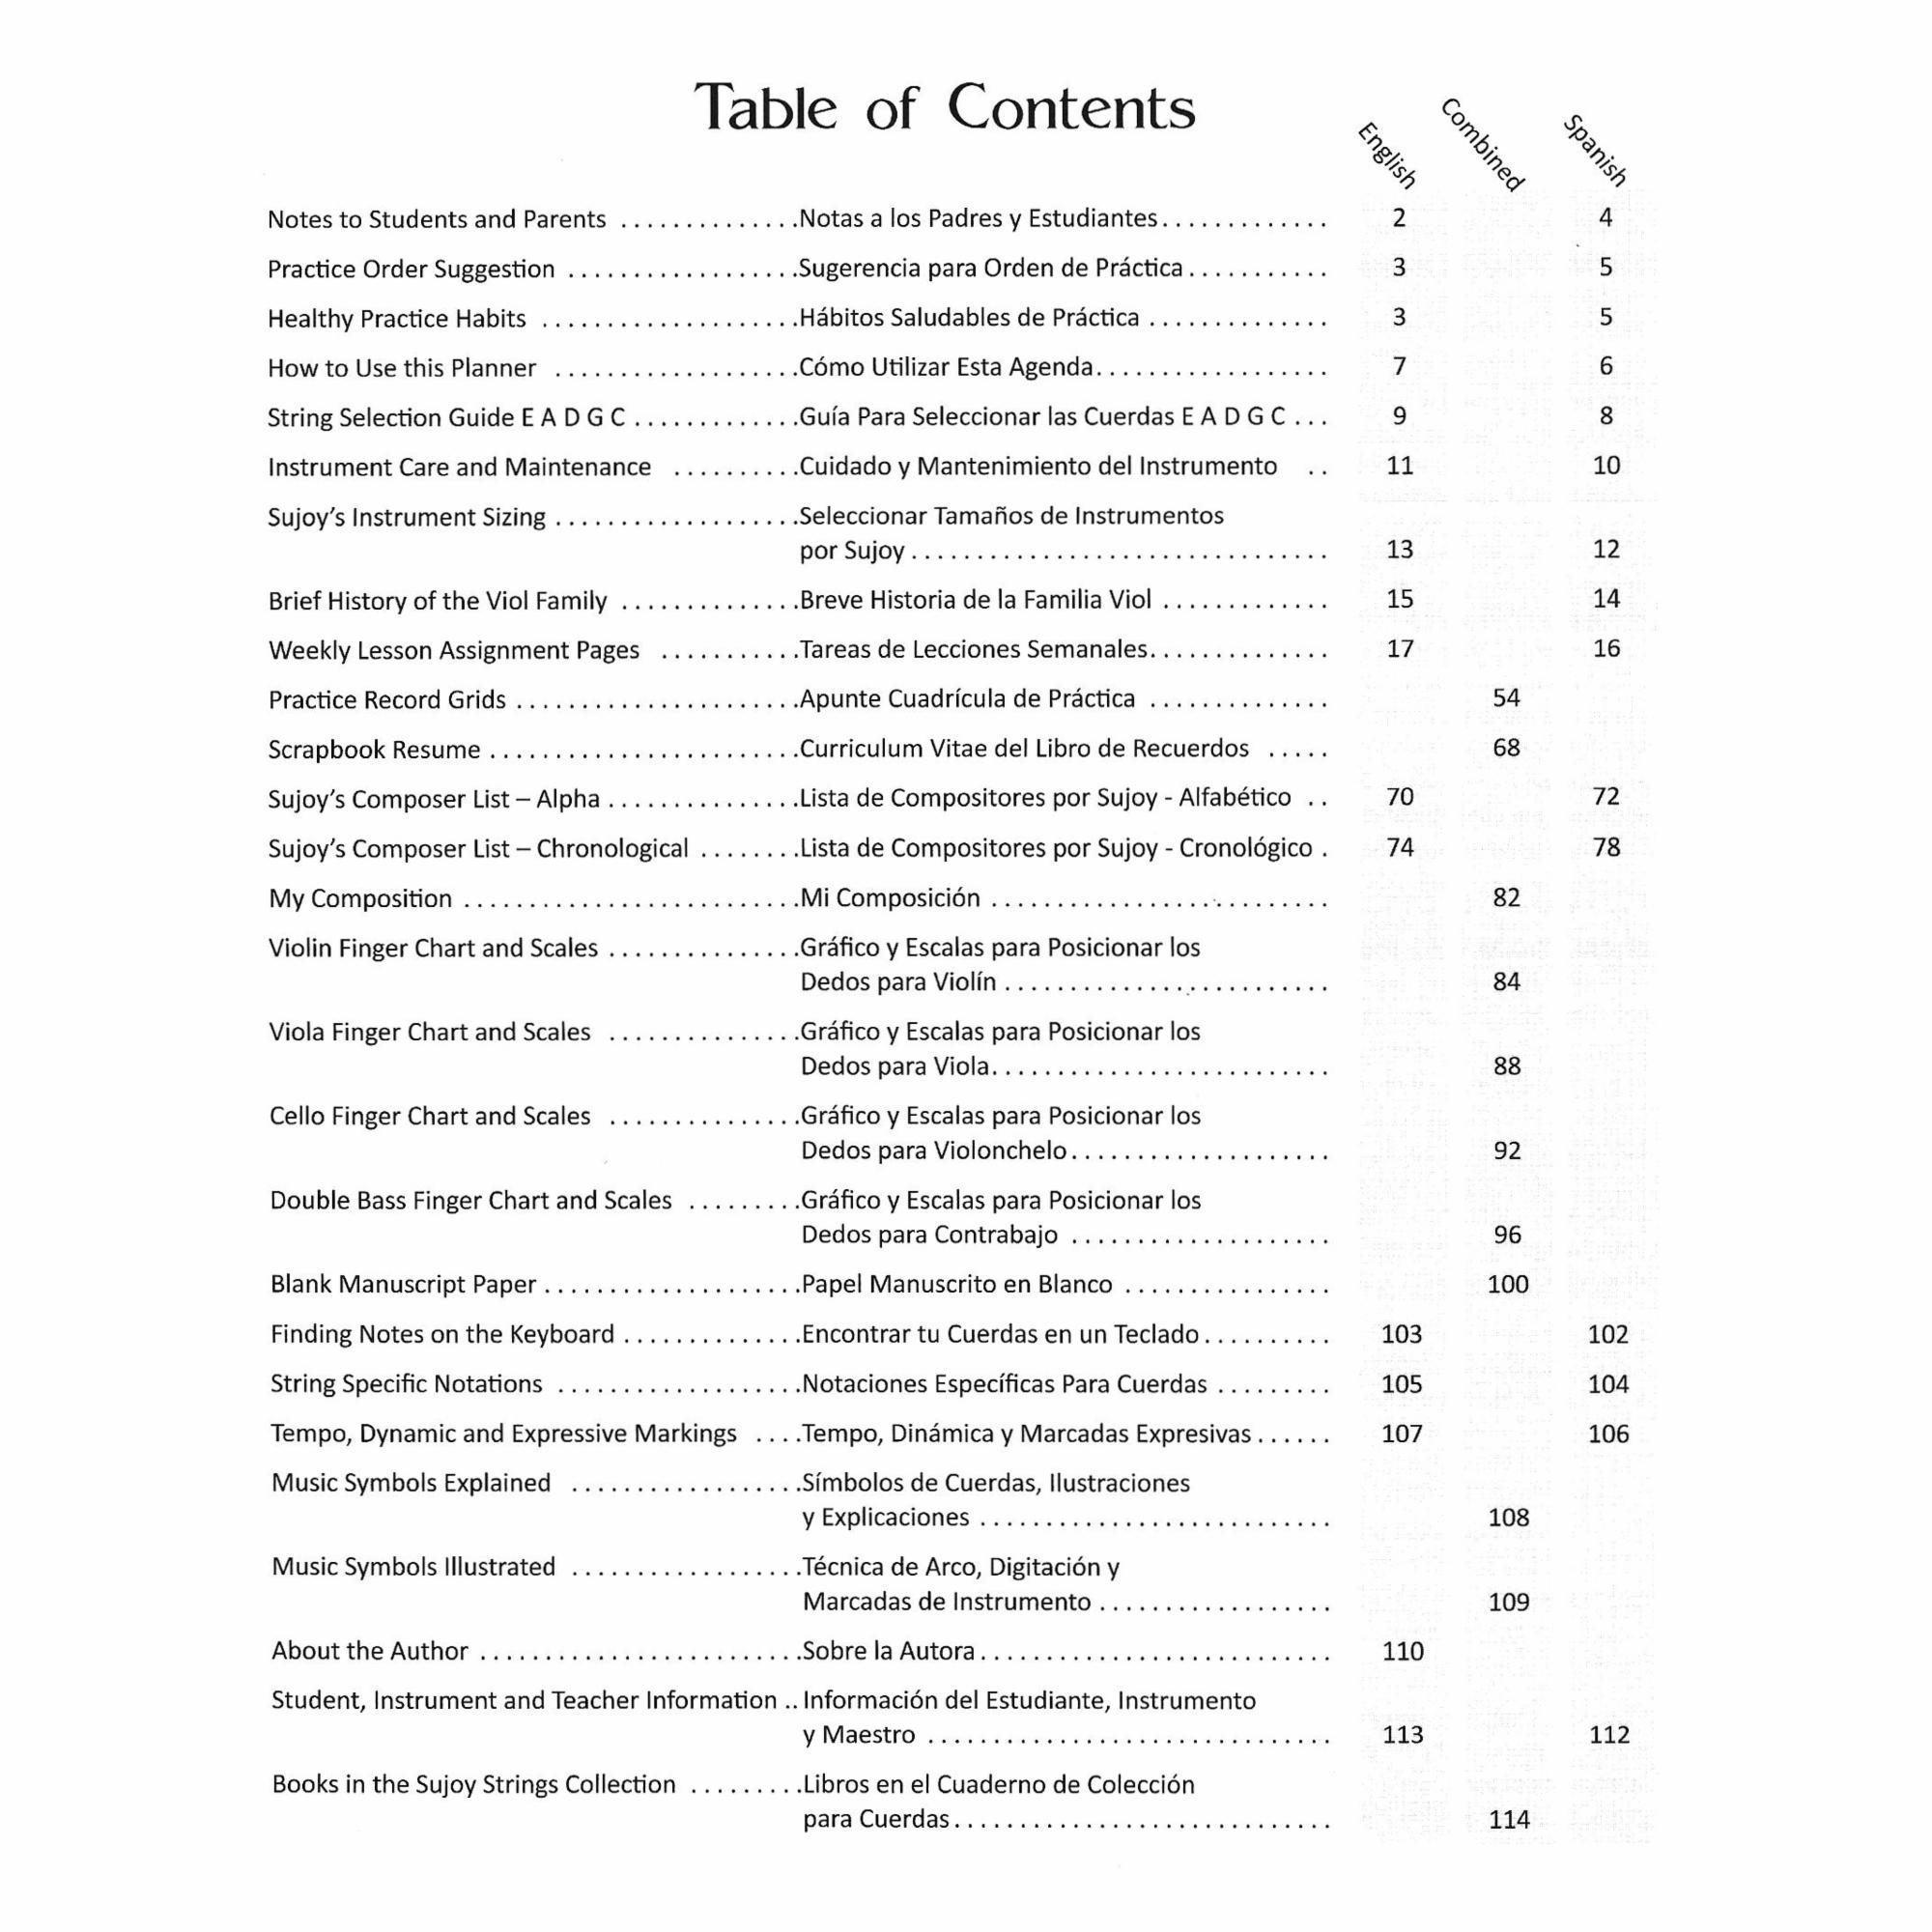 Tables of Contents